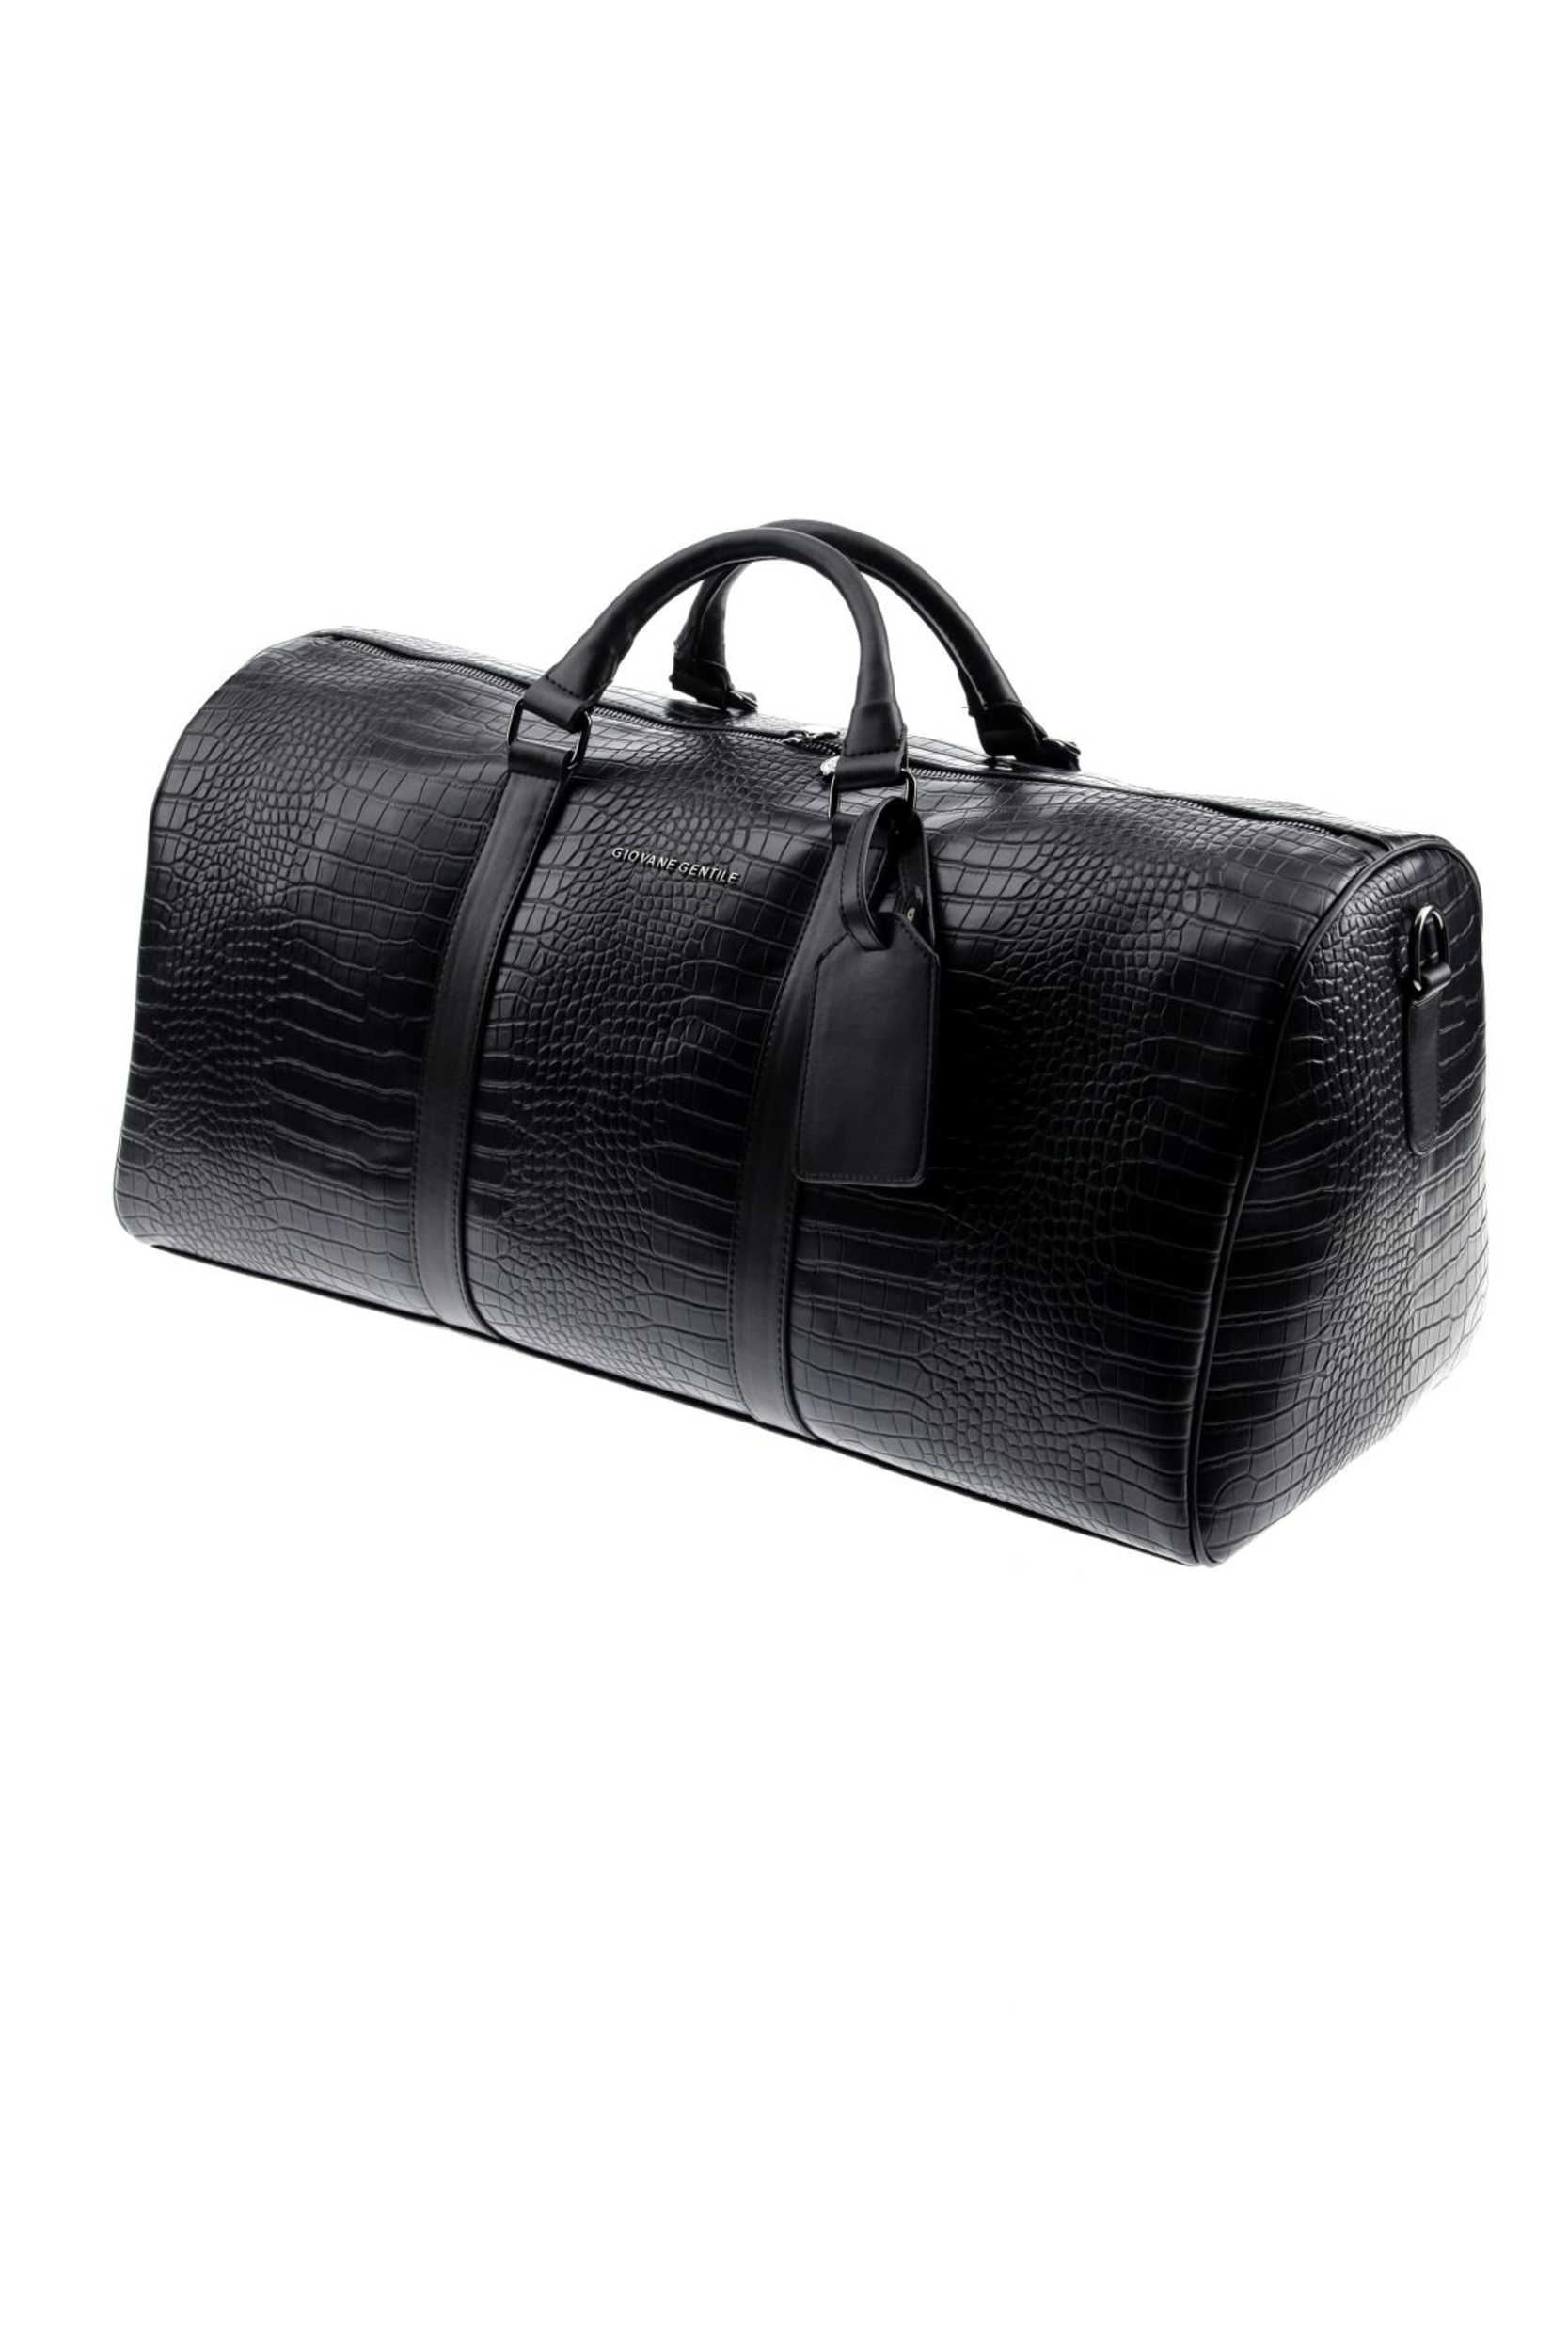 Picture of Giovane G. Designers Bag